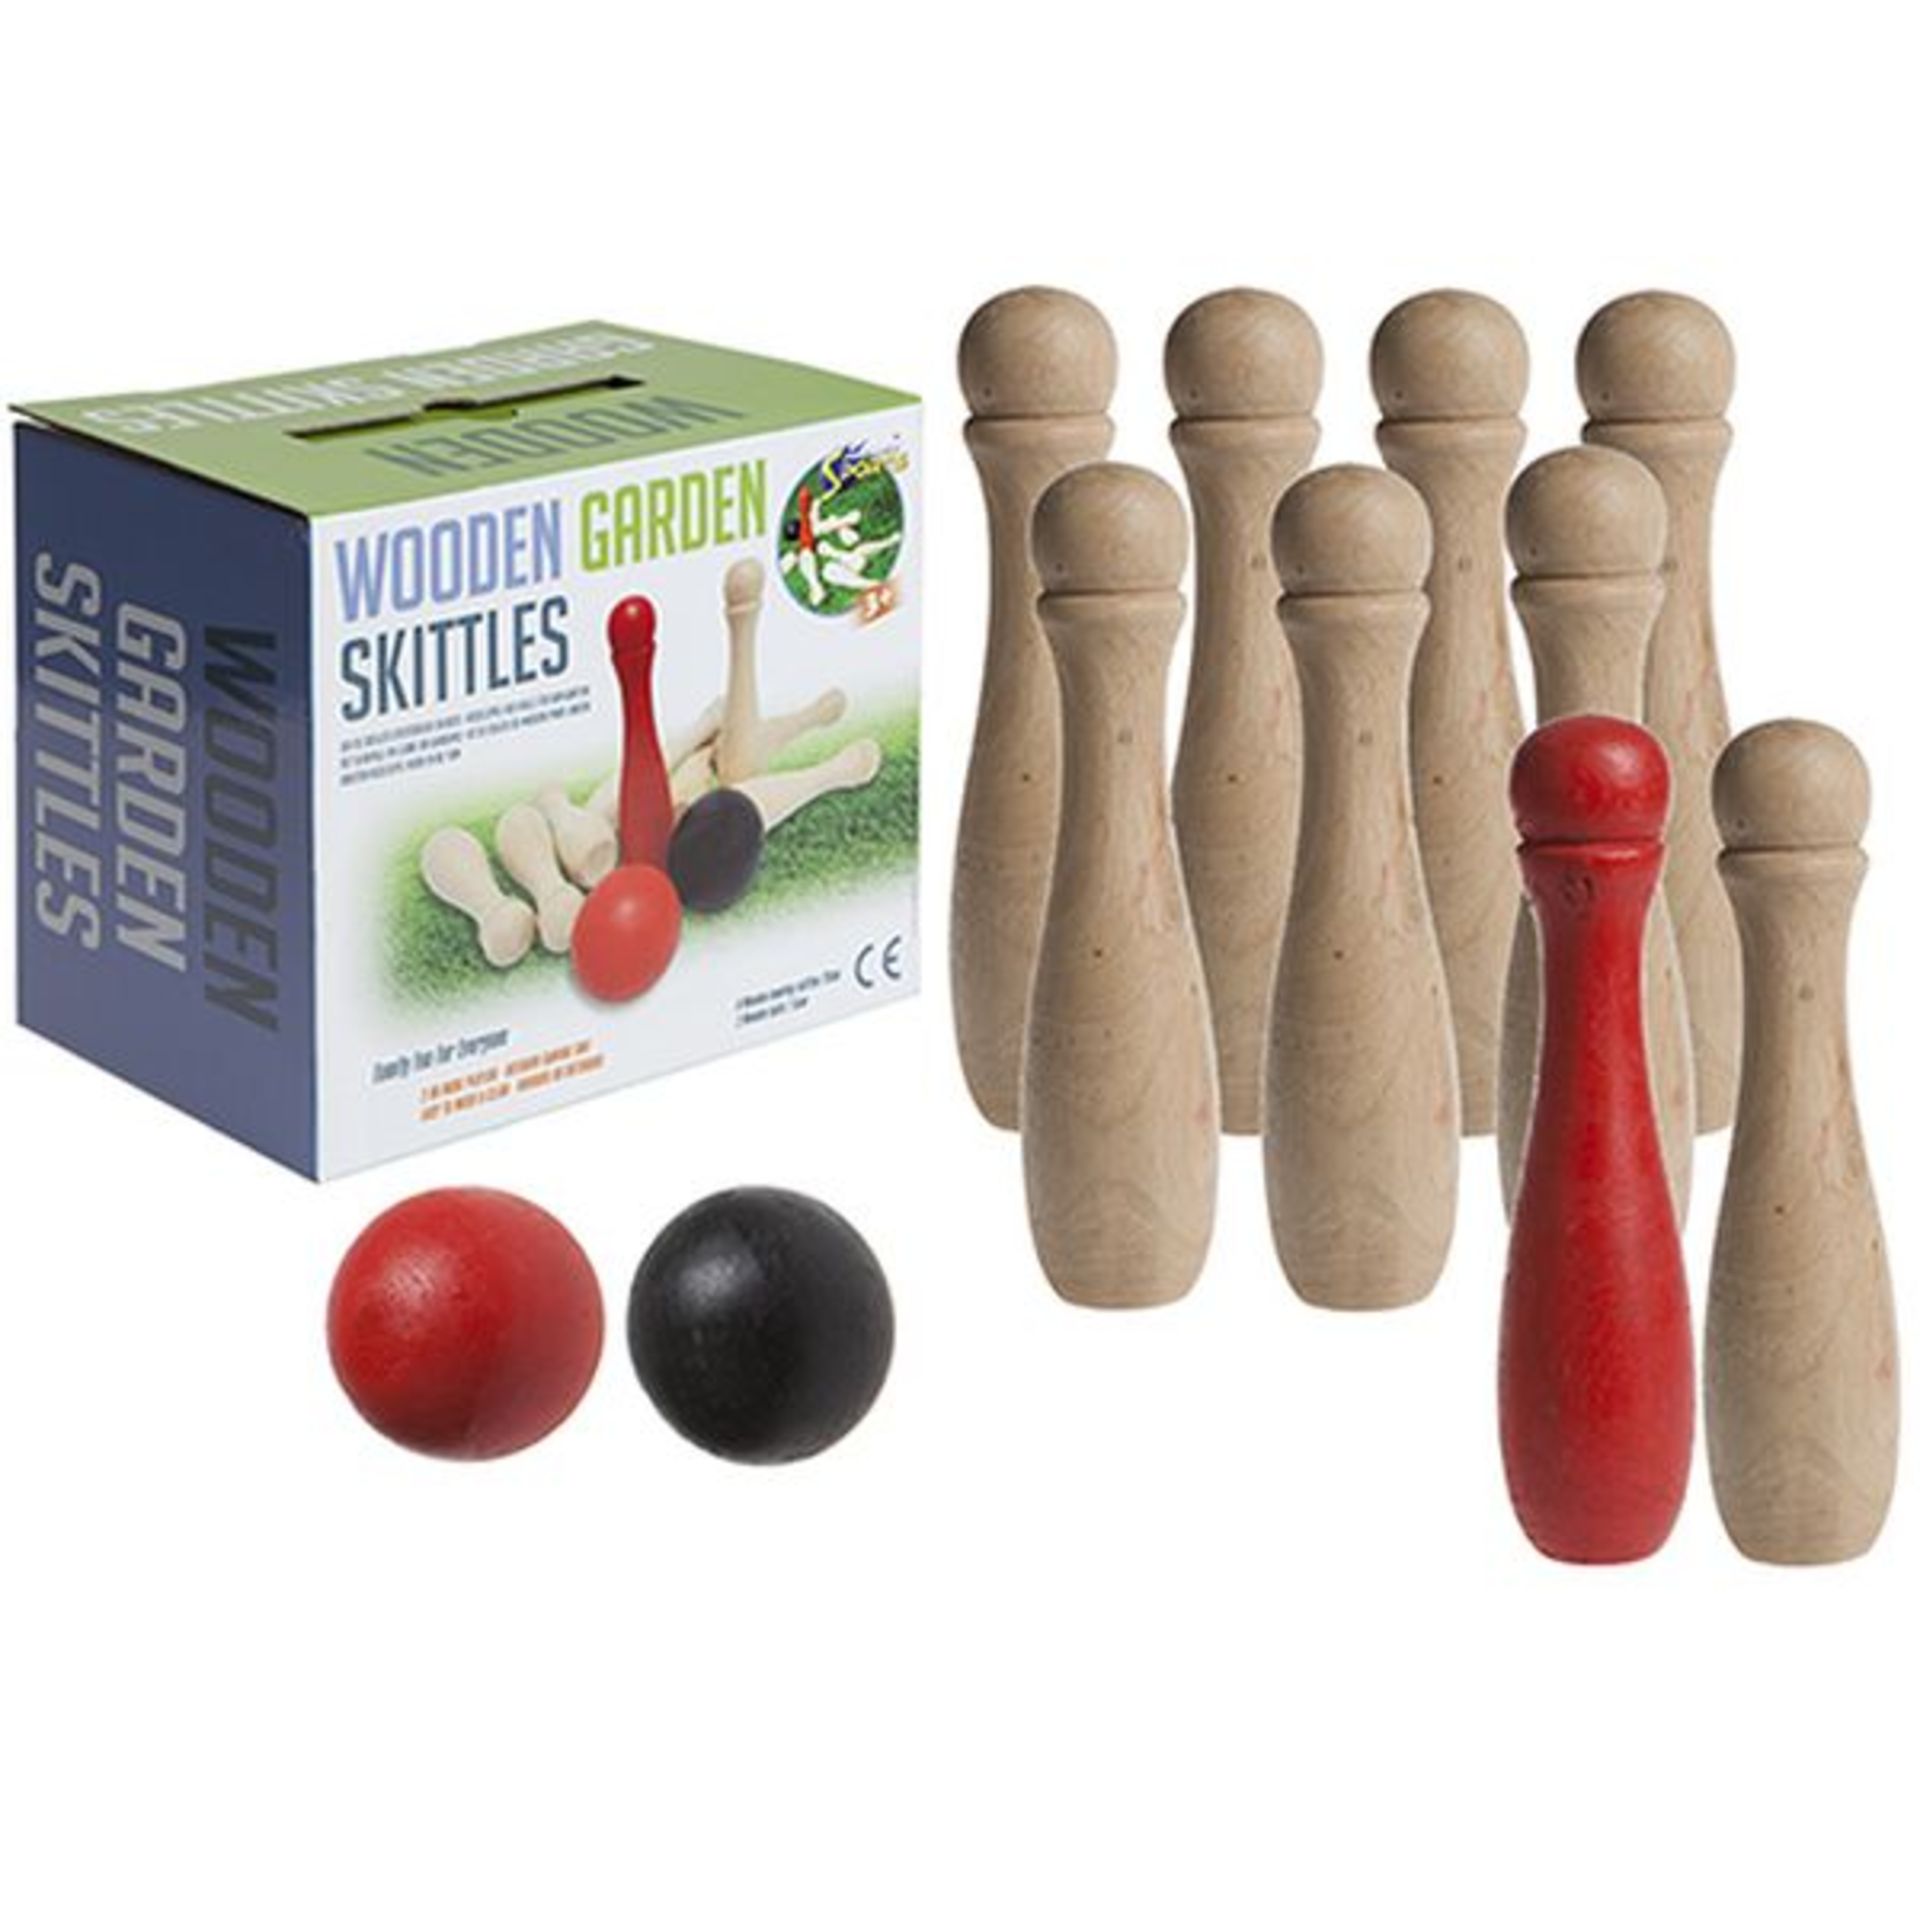 V *TRADE QTY* Brand New Premier Sports Wooden Garden Skittles X 7 YOUR BID PRICE TO BE MULTIPLIED BY